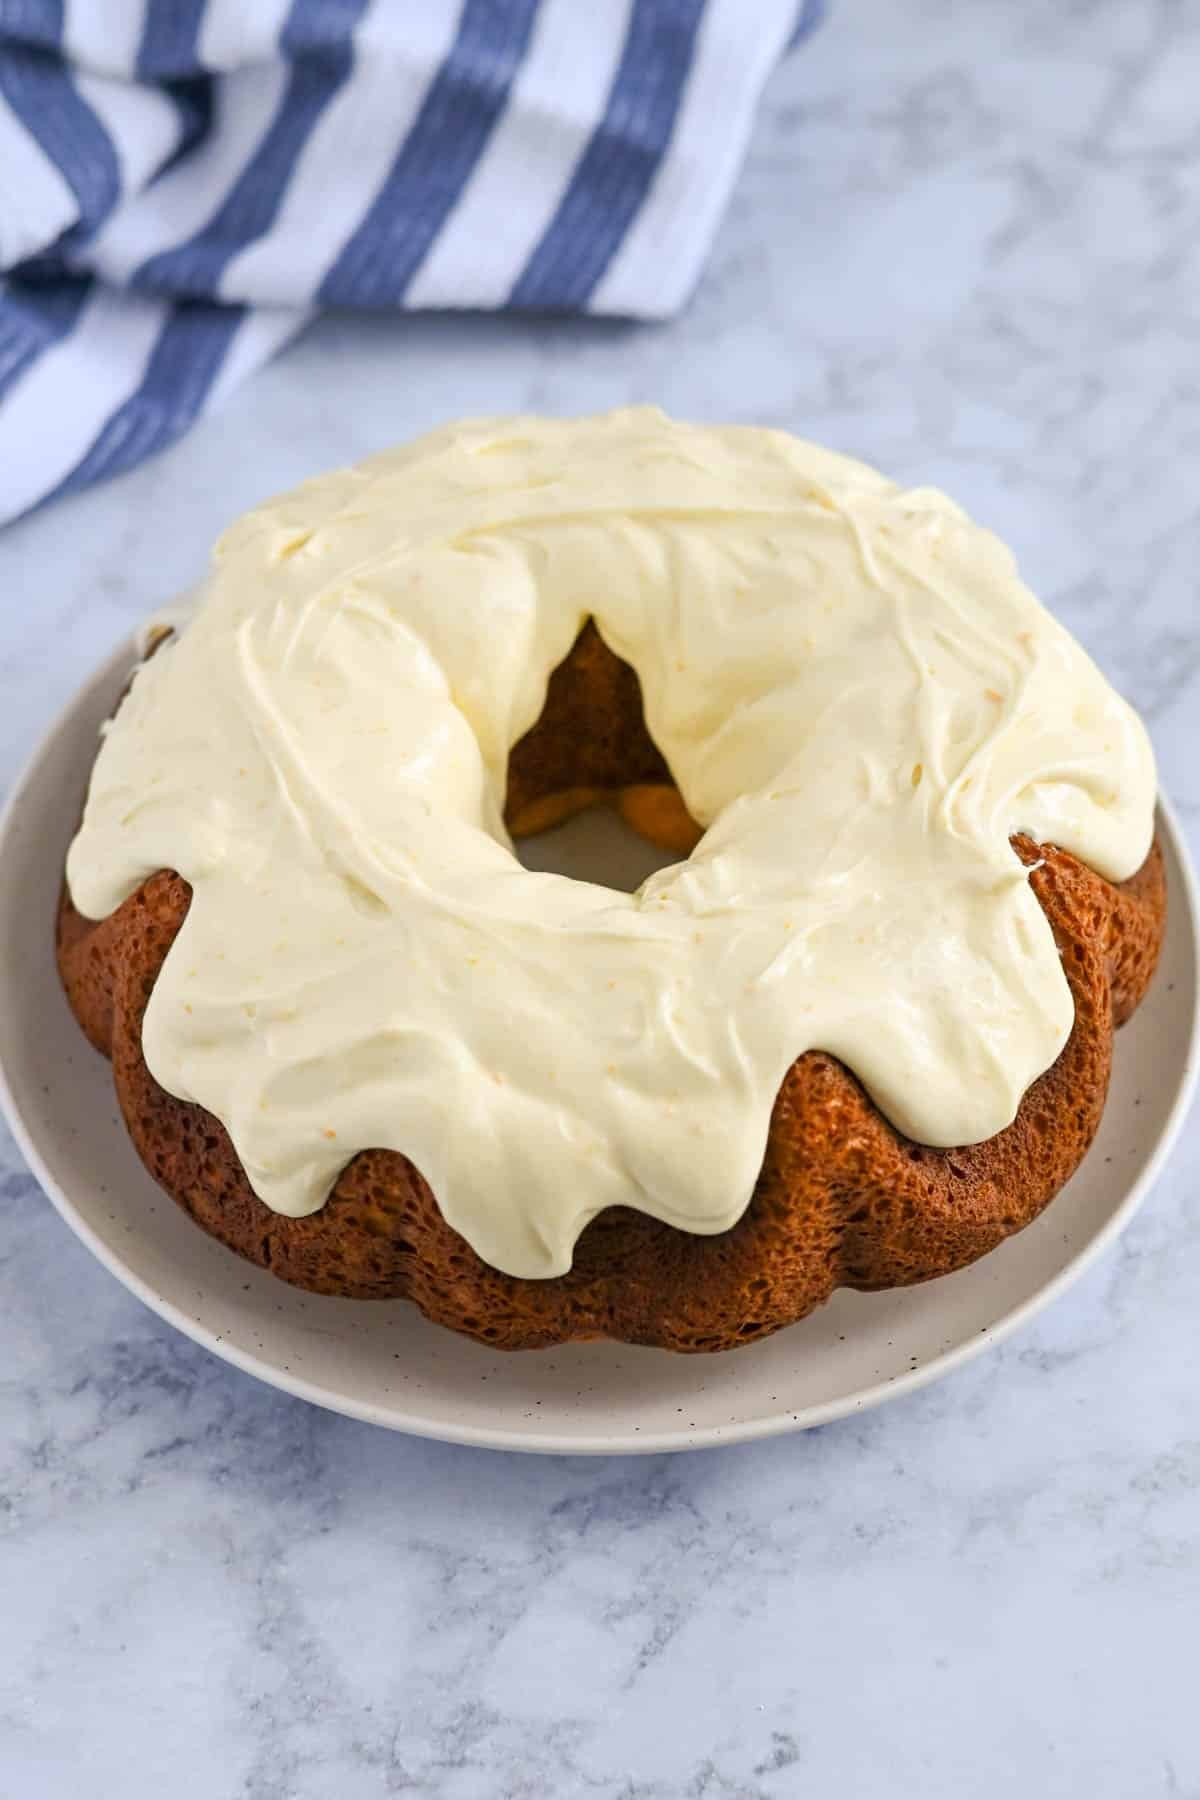 A Bundt cake with white frosting on top sits on a white plate, placed on a marble surface. A striped cloth is in the background.